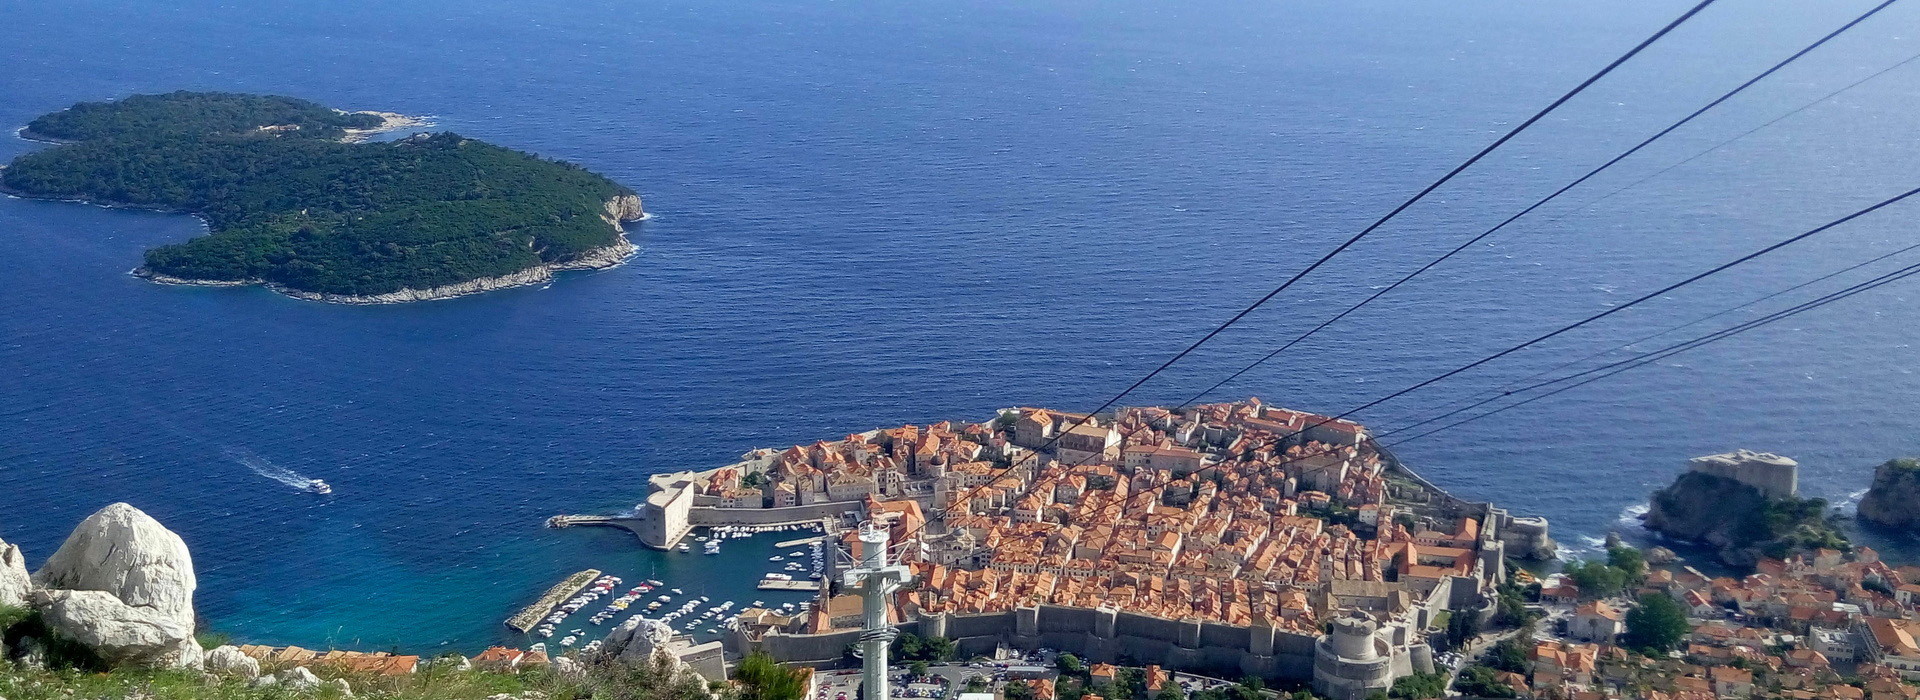 Cycling on the Dalmatian Coast guided holiday - Dubrovnik